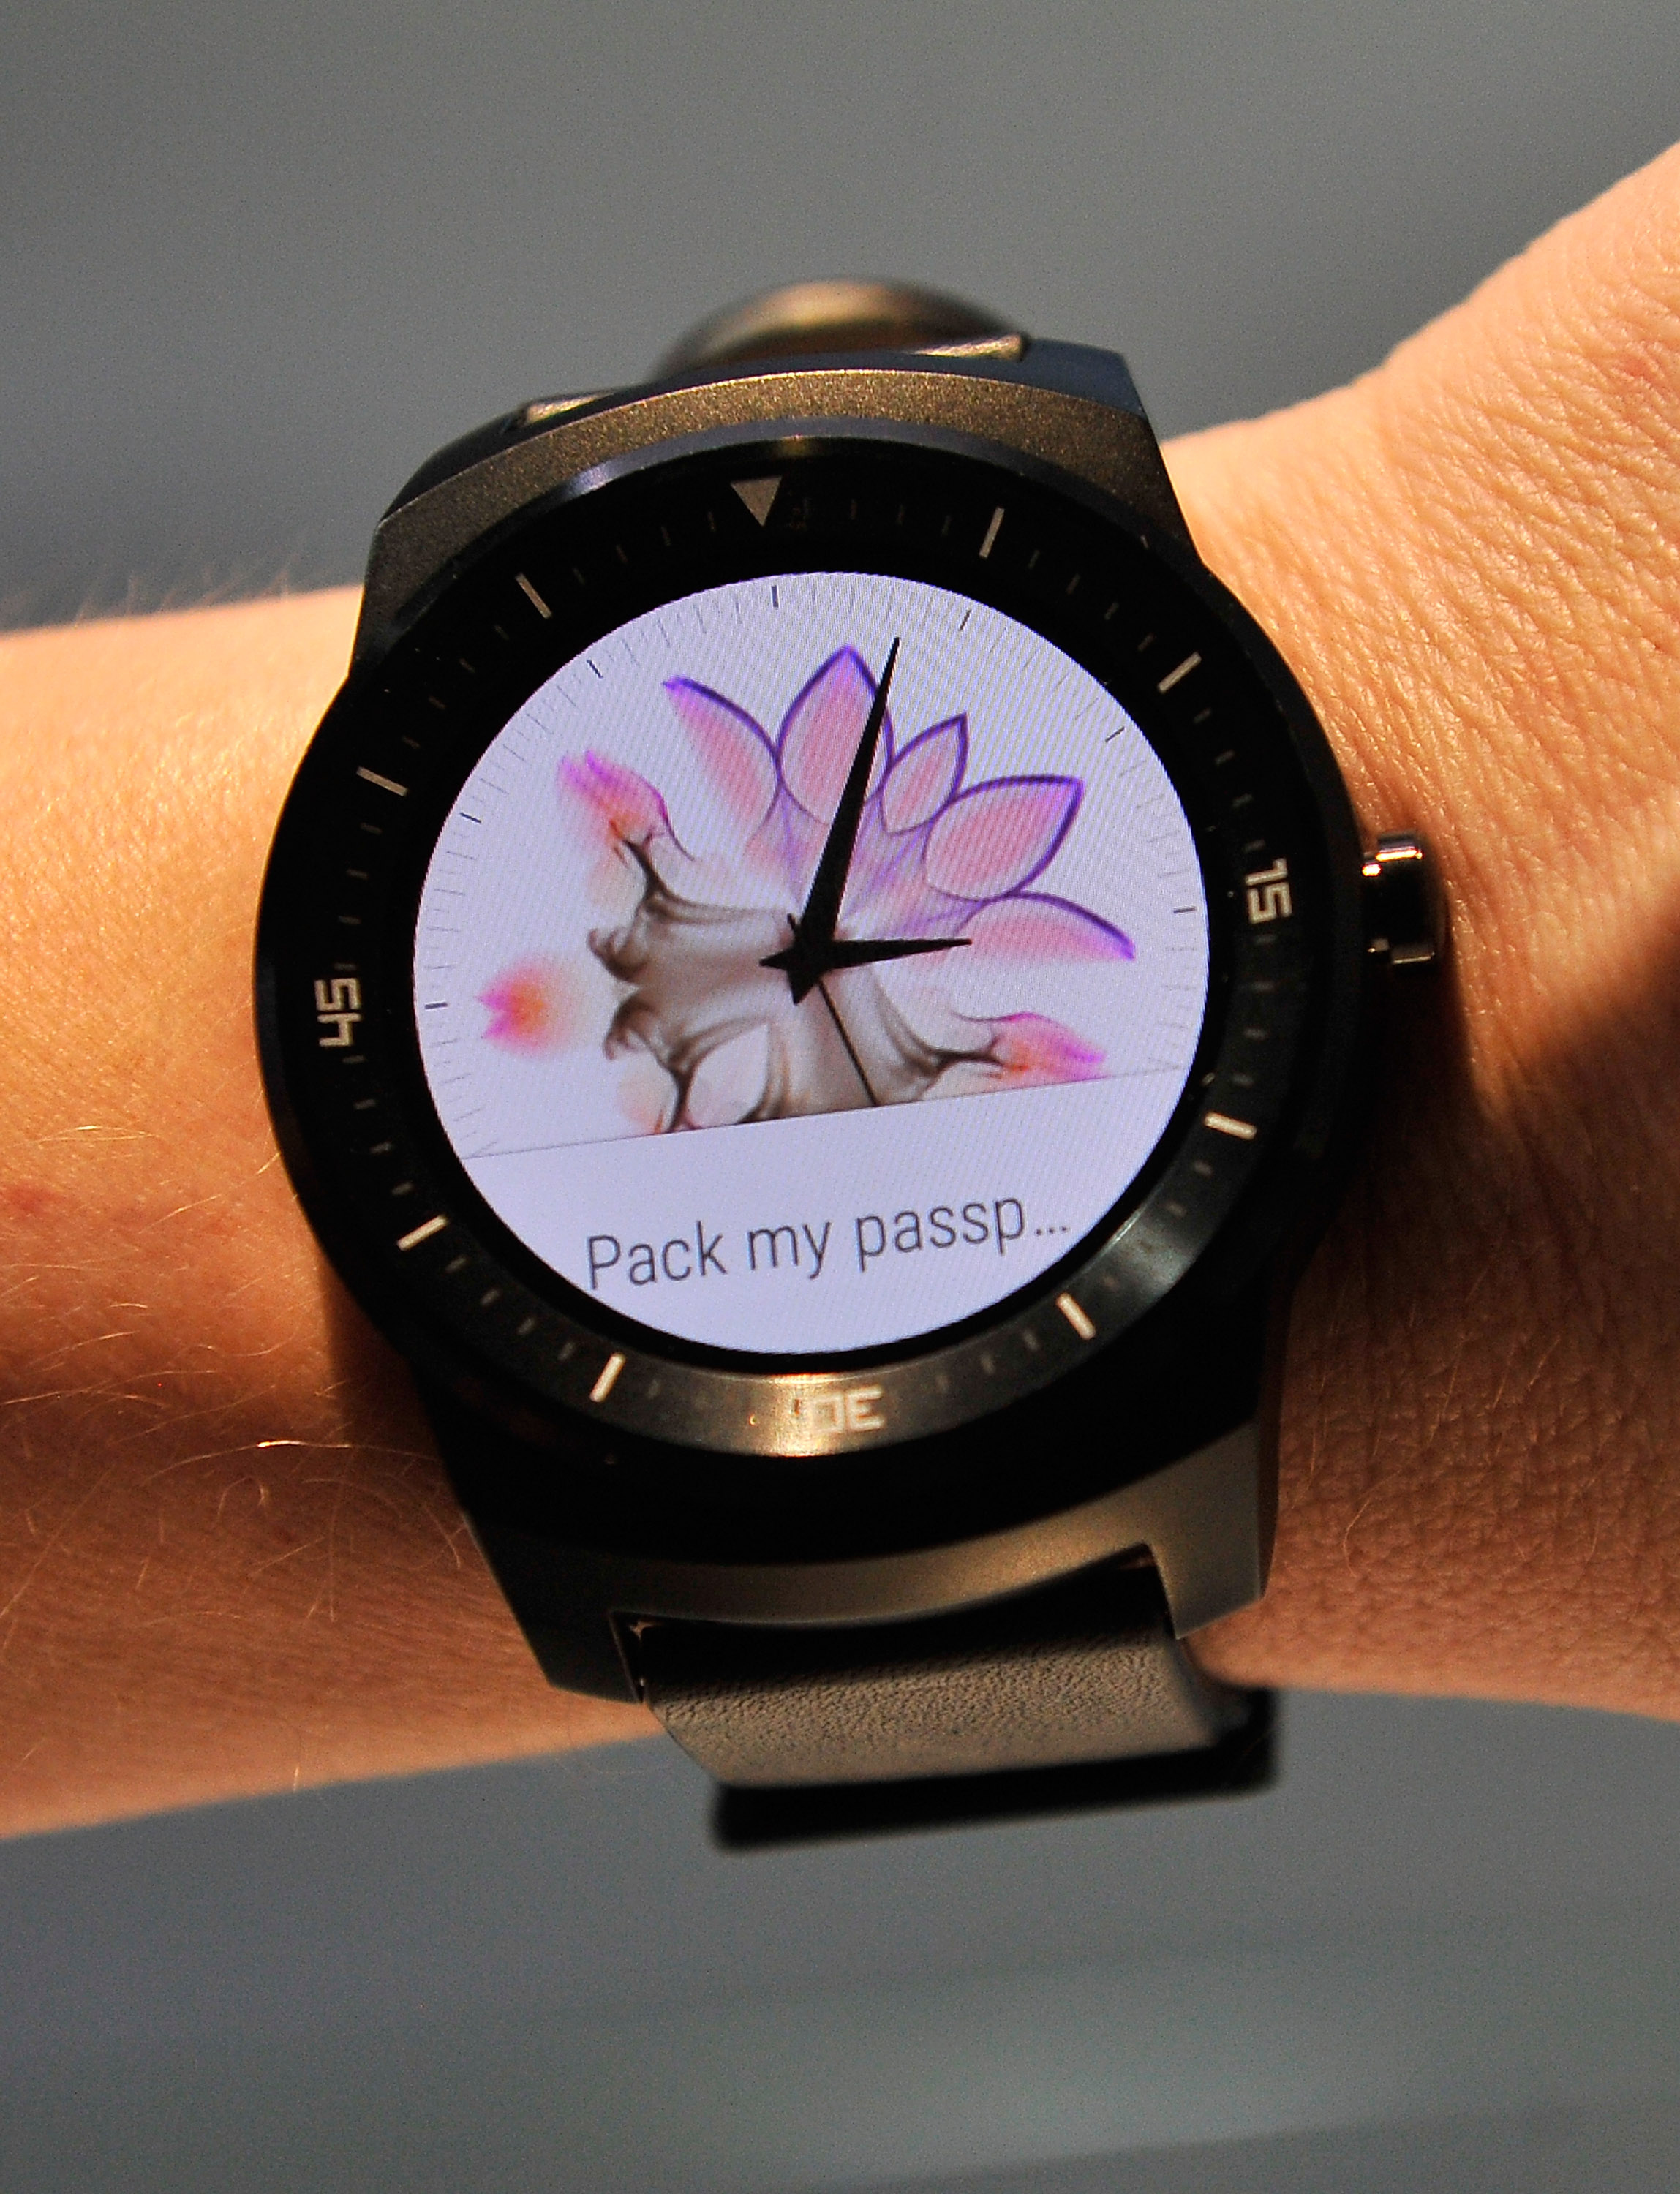 A model displays the LG G Watch R during the 2015 International CES on Jan. 6, 2015 in Las Vegas, Nevada.